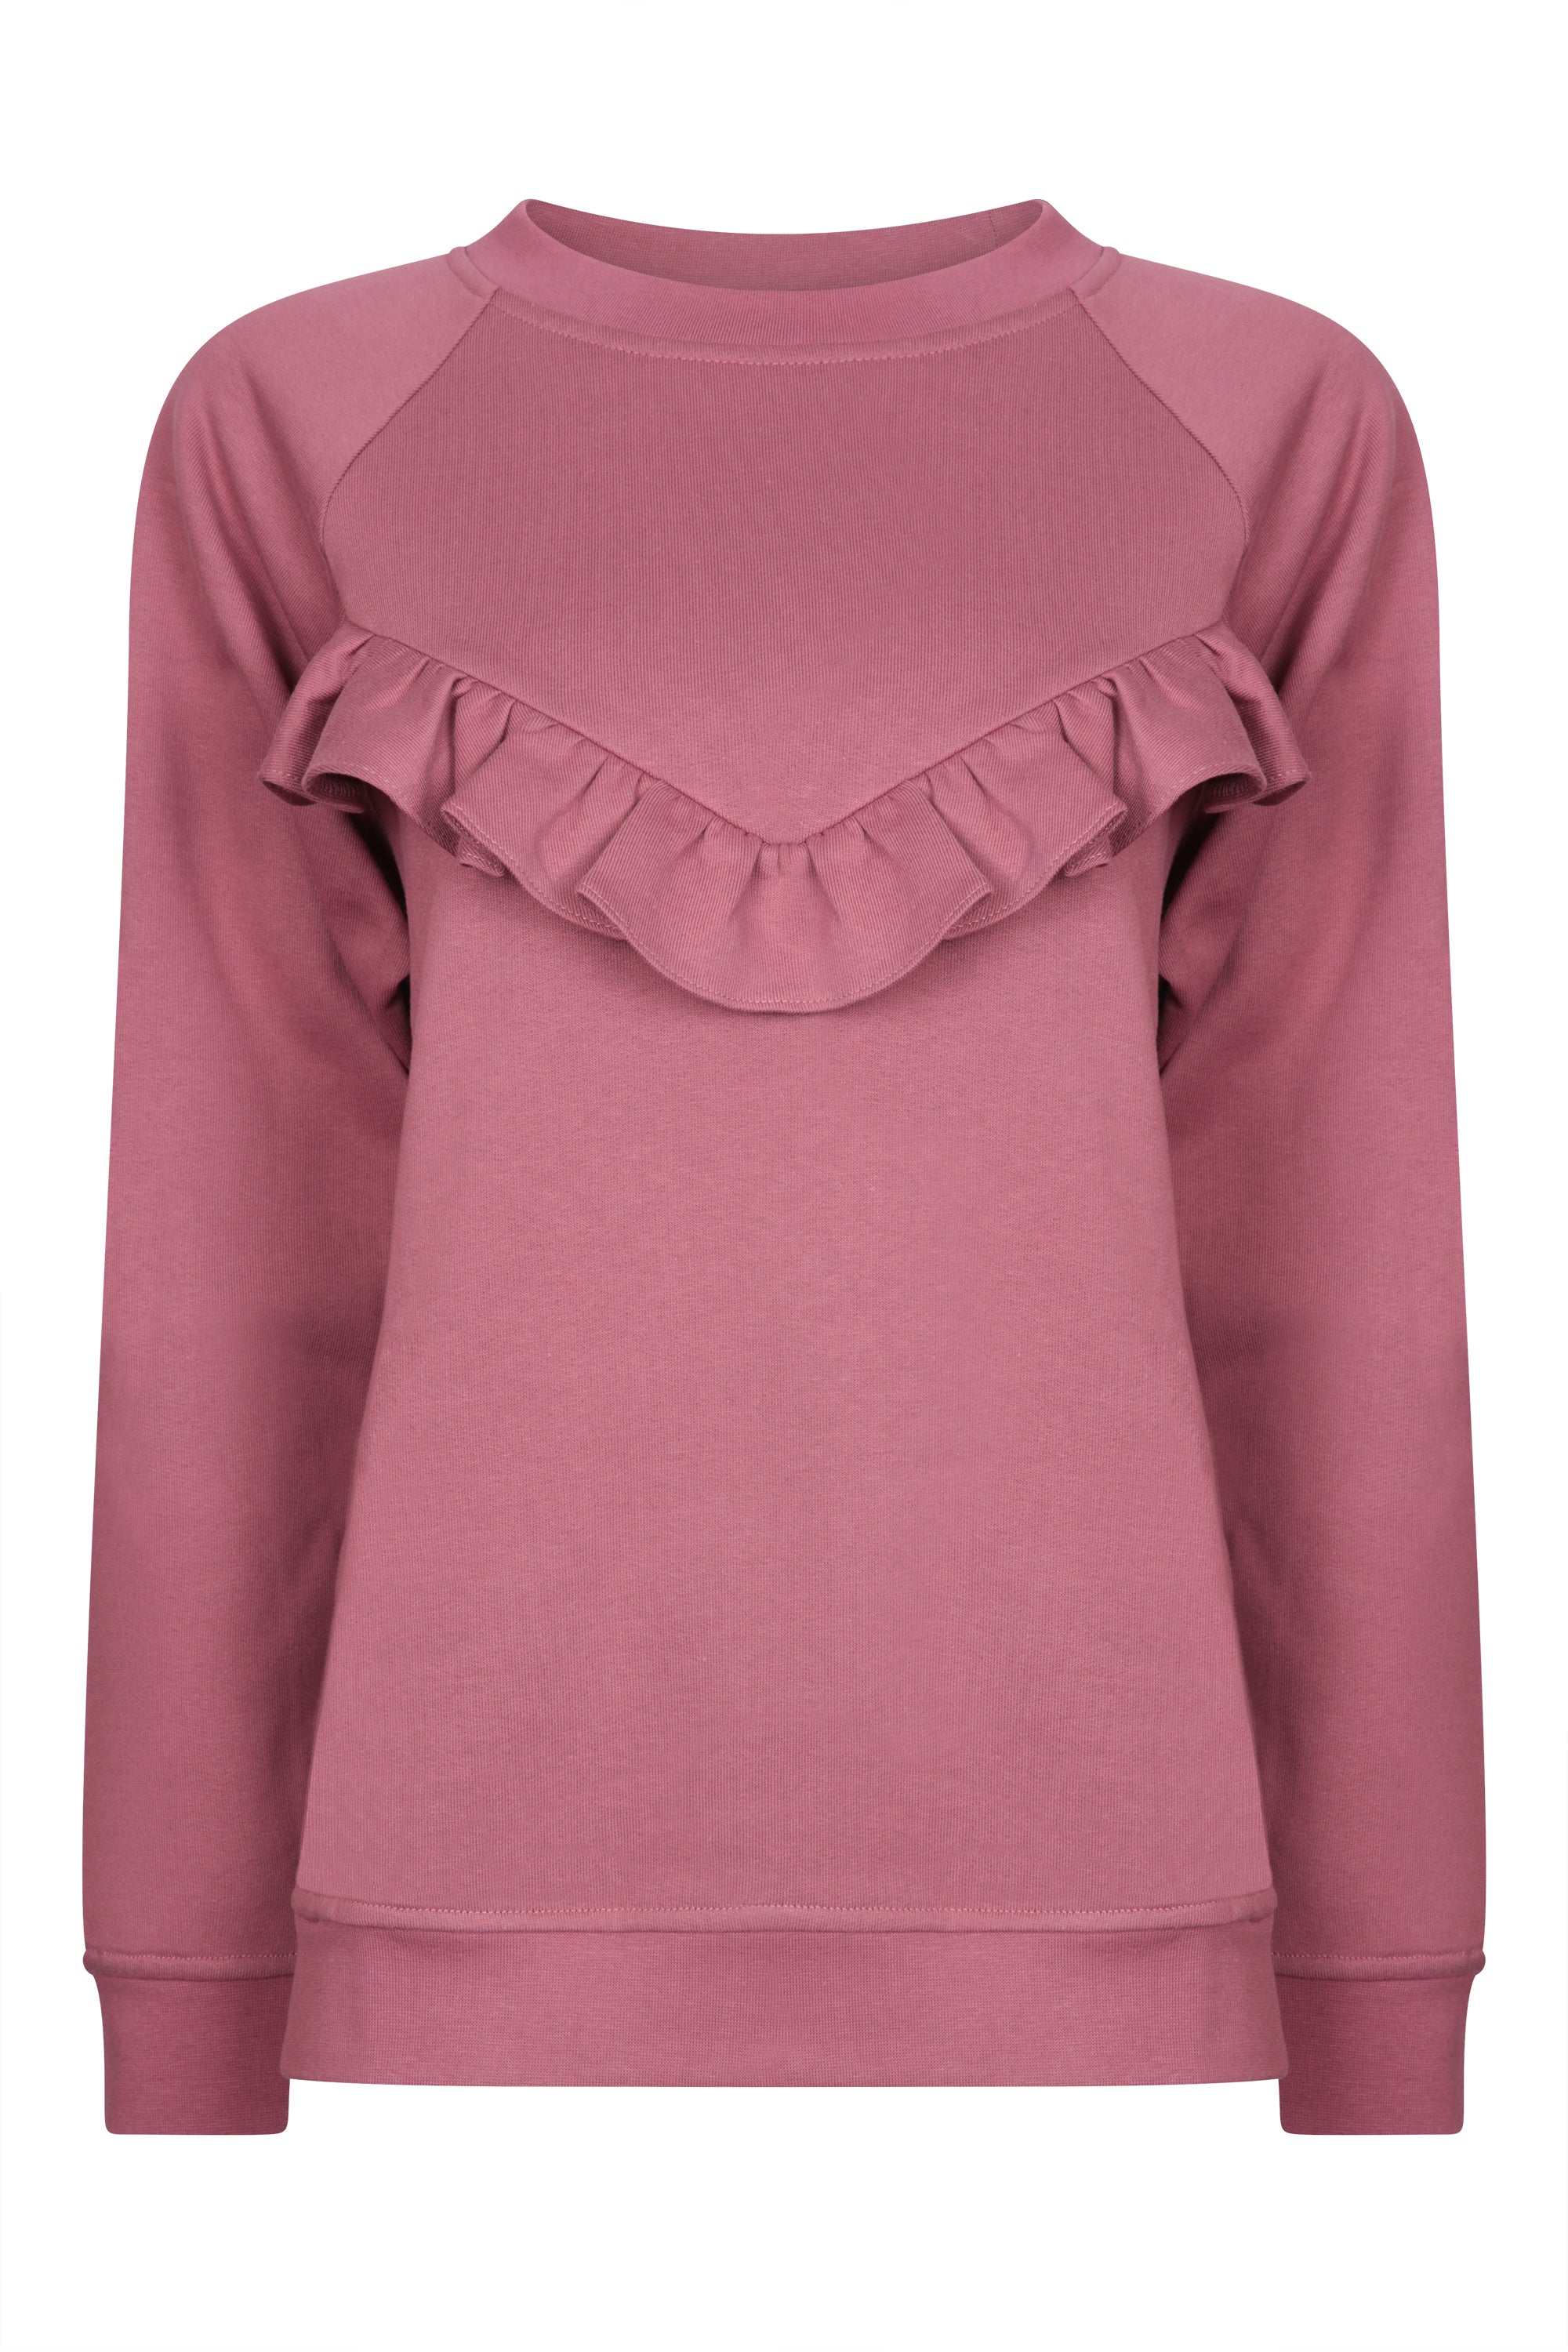 Breastfeeding Sweatshirt in Rose. Fashion meets functionality with this beautiful feminine style breastfeeding sweatshirt for new mums. Organic cotton soft against both yours and baby's skin. Concealed zips under the ruffle, open for perfect feeding access for your baby.